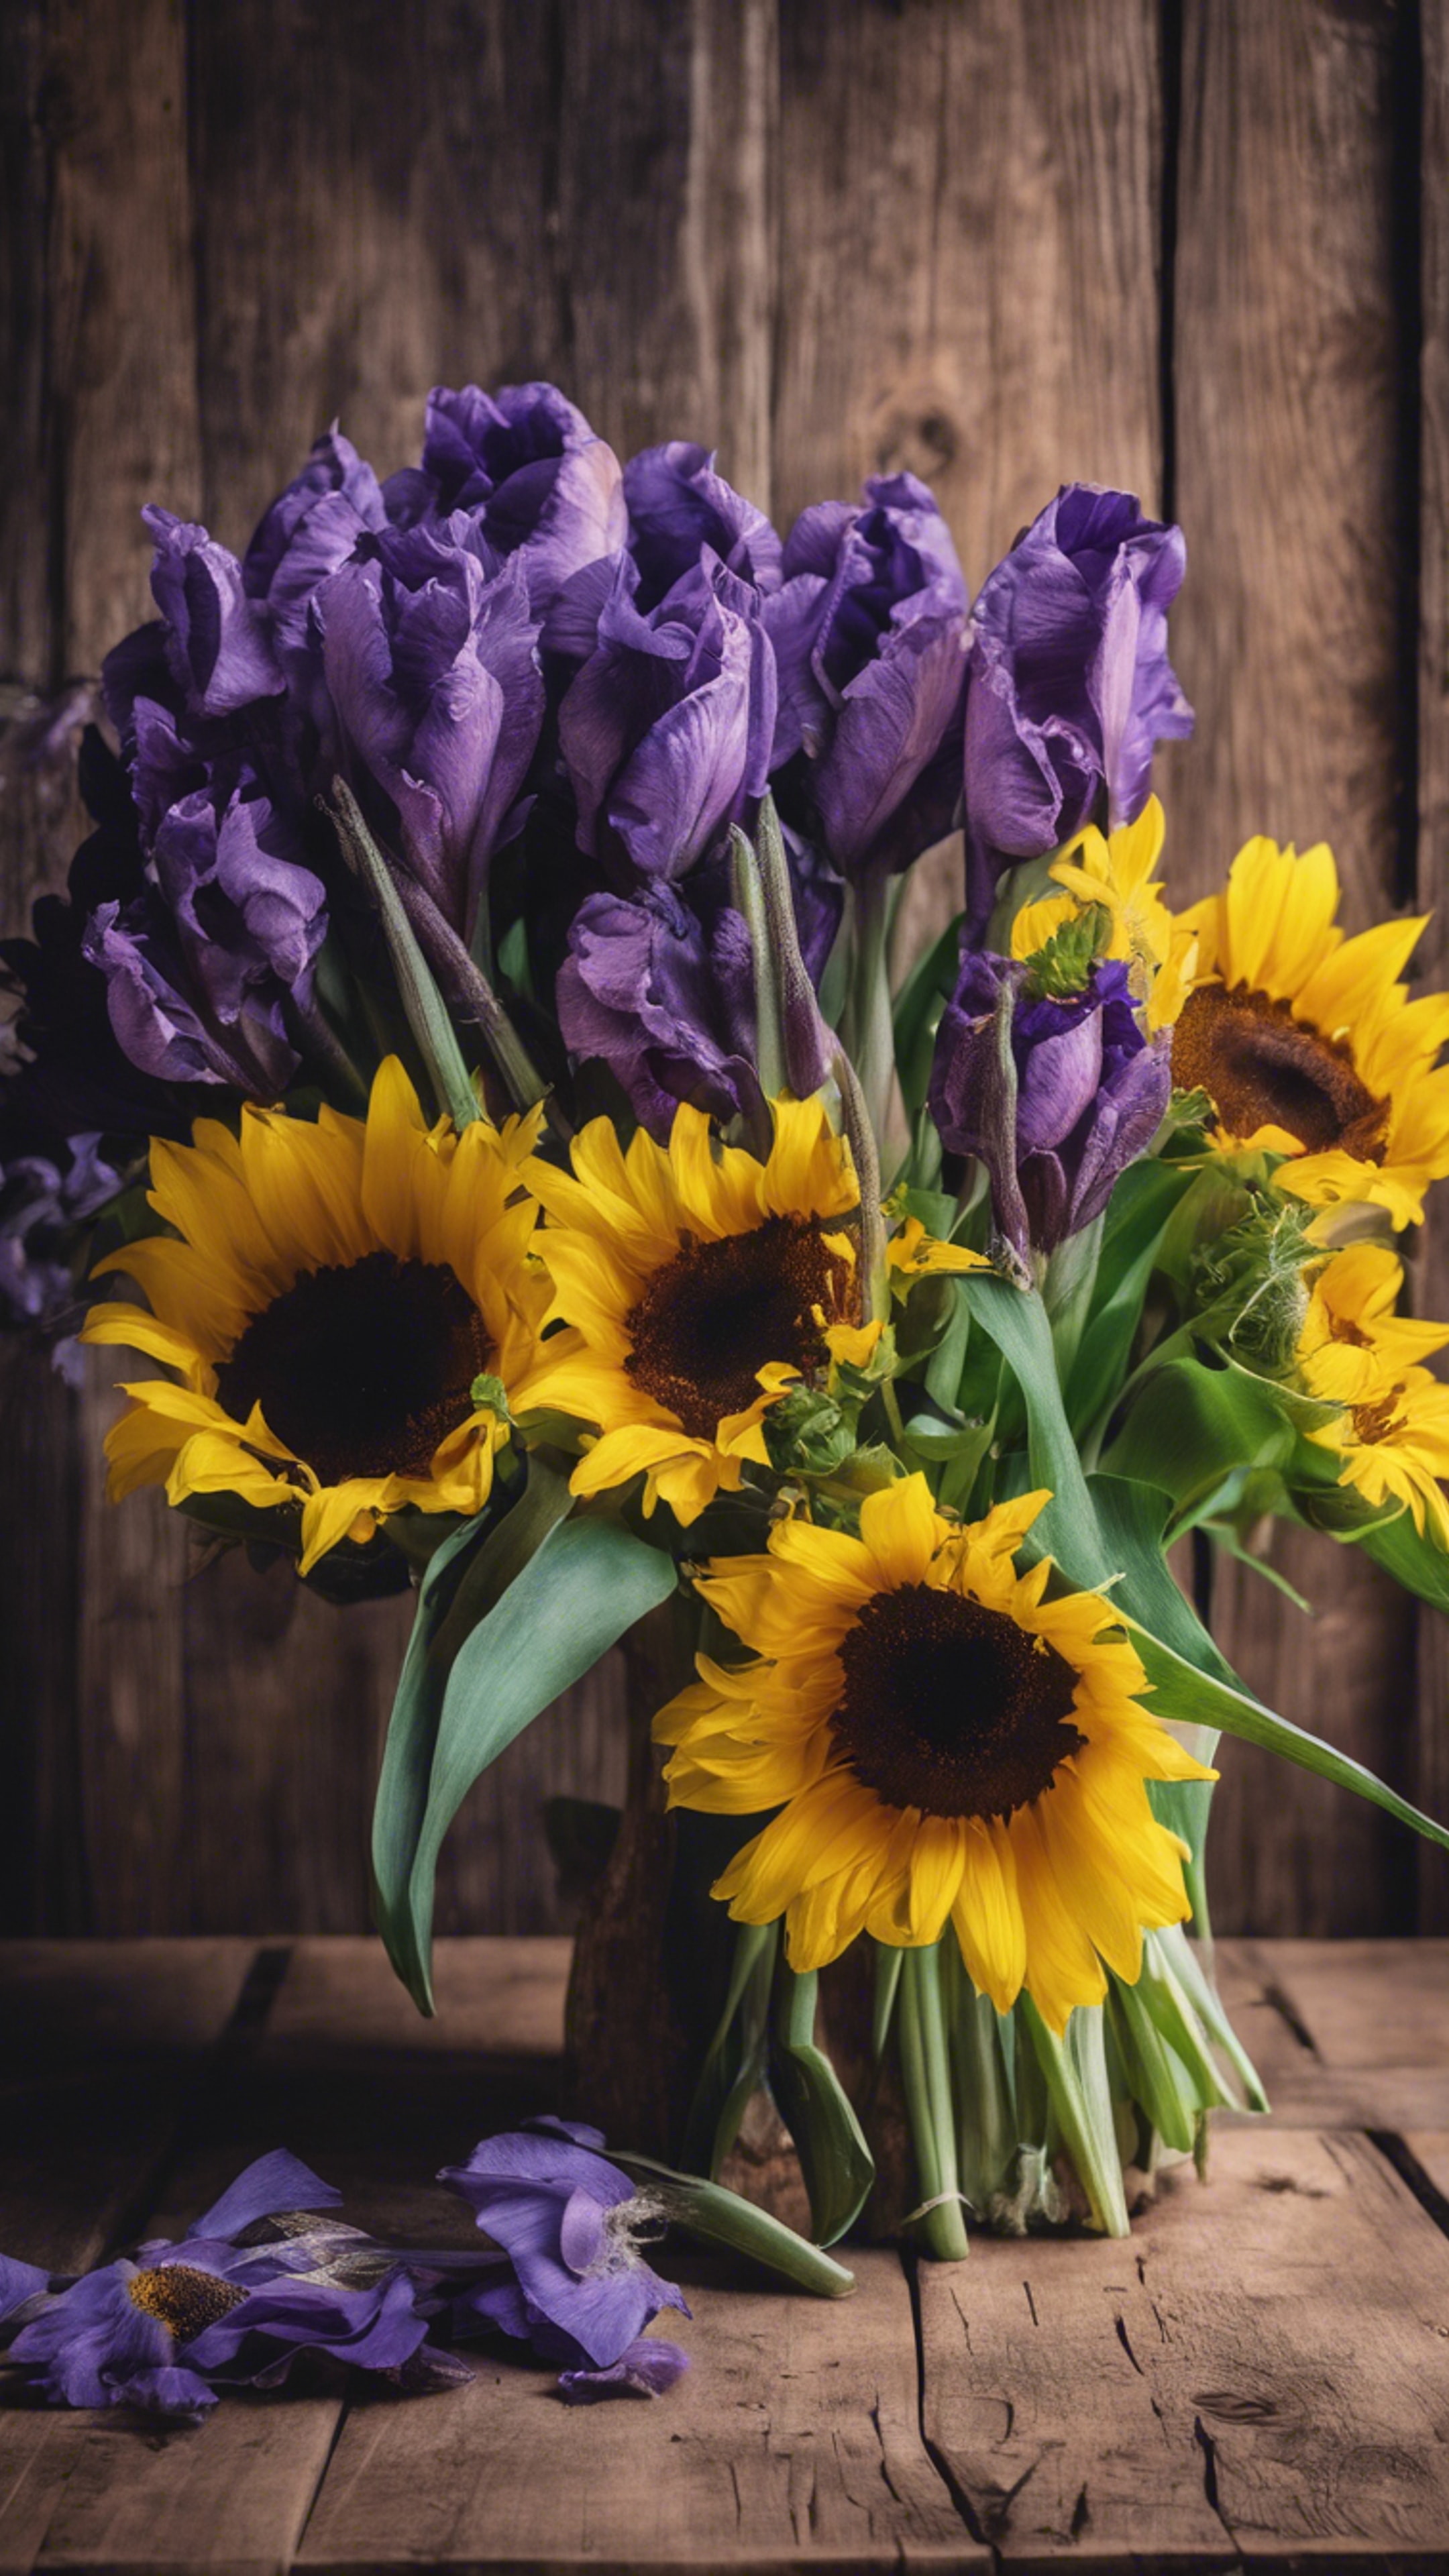 A bouquet of violet irises and bright yellow sunflowers sitting on a rustic wooden table. Sfondo[036542cc0bff4a9eafa2]